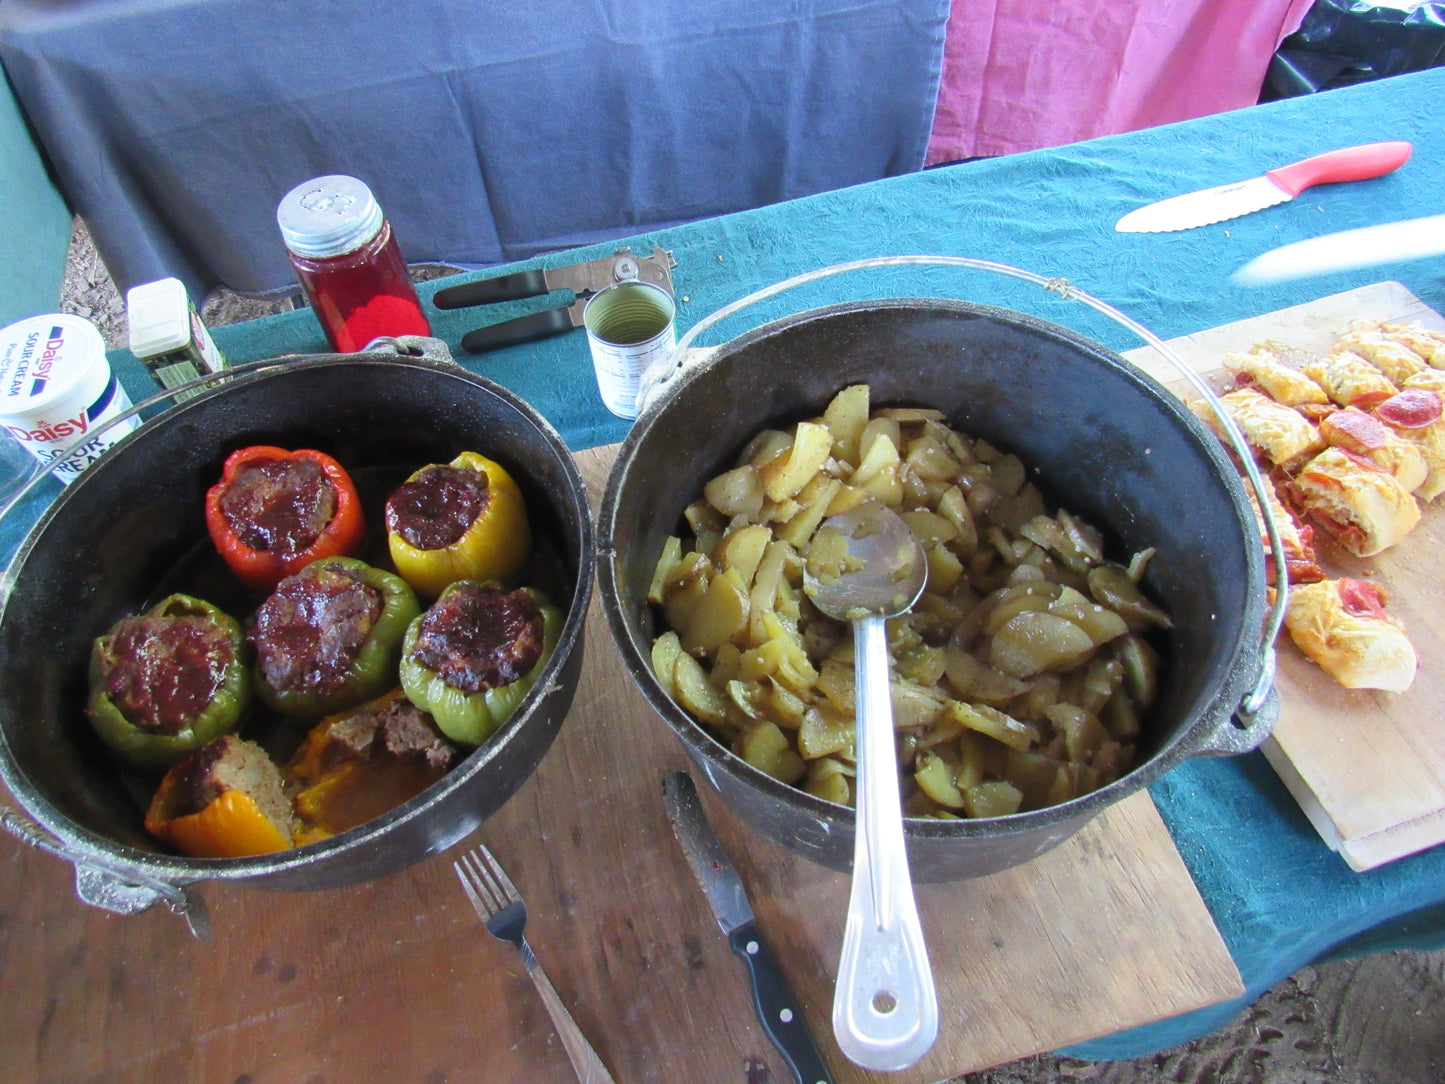 June 8th - Outdoor Cast Iron Dutch Oven Cooking CLASS